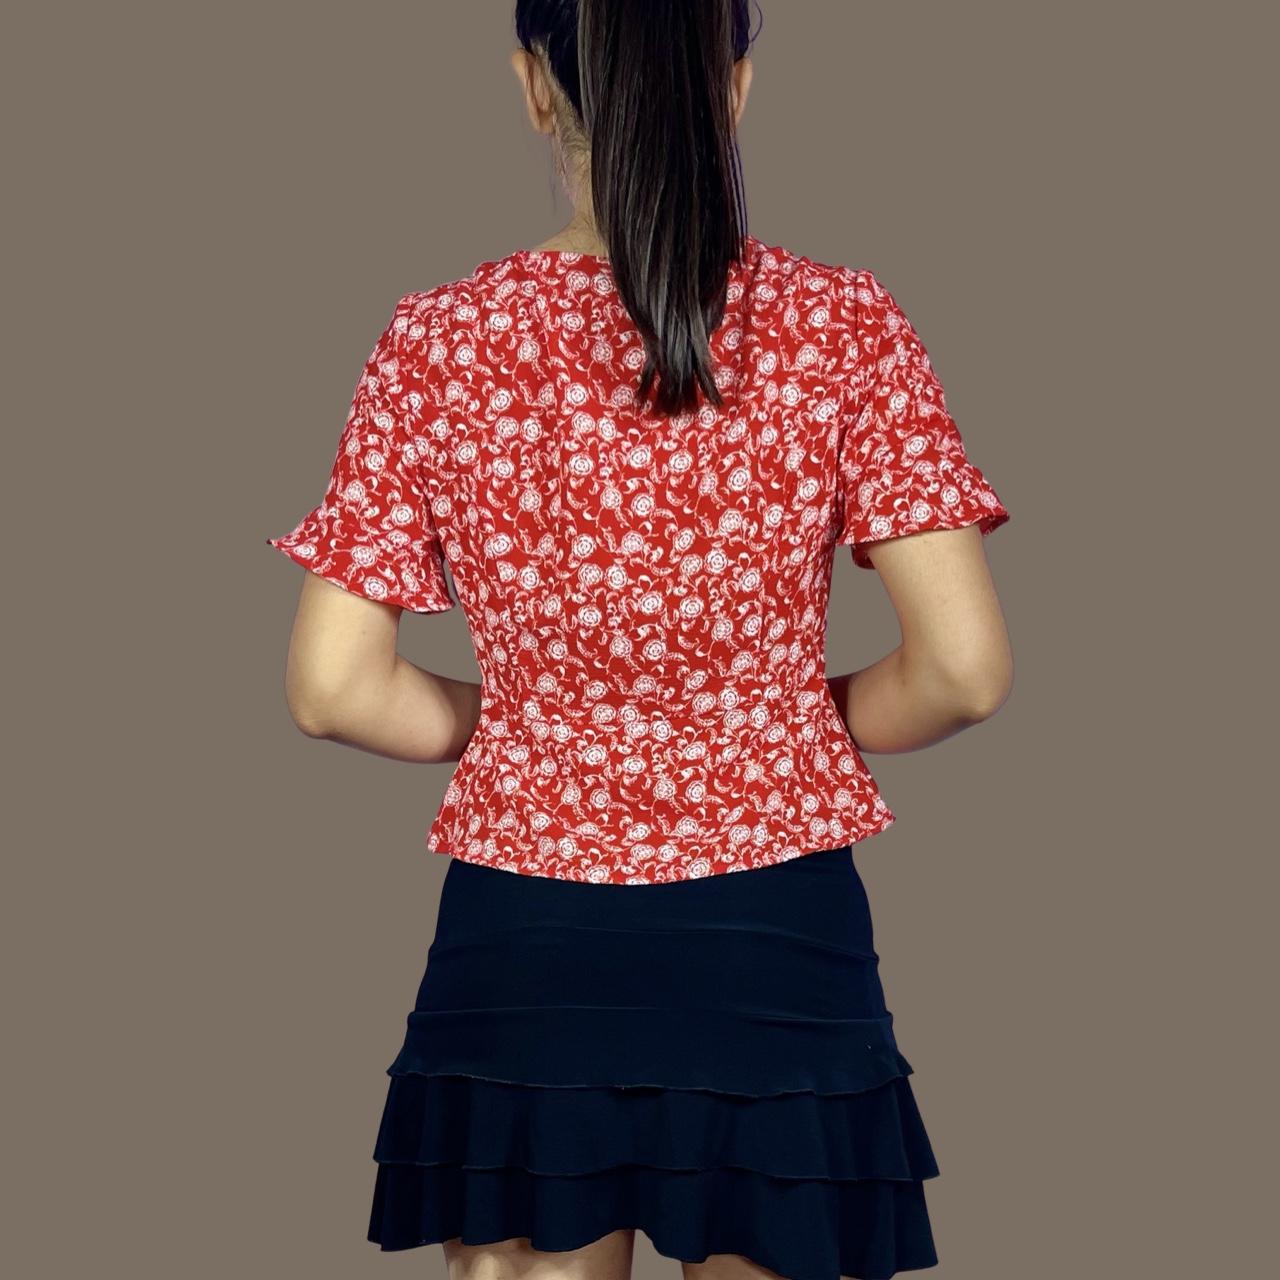 Product Image 3 - Red baby doll floral top.